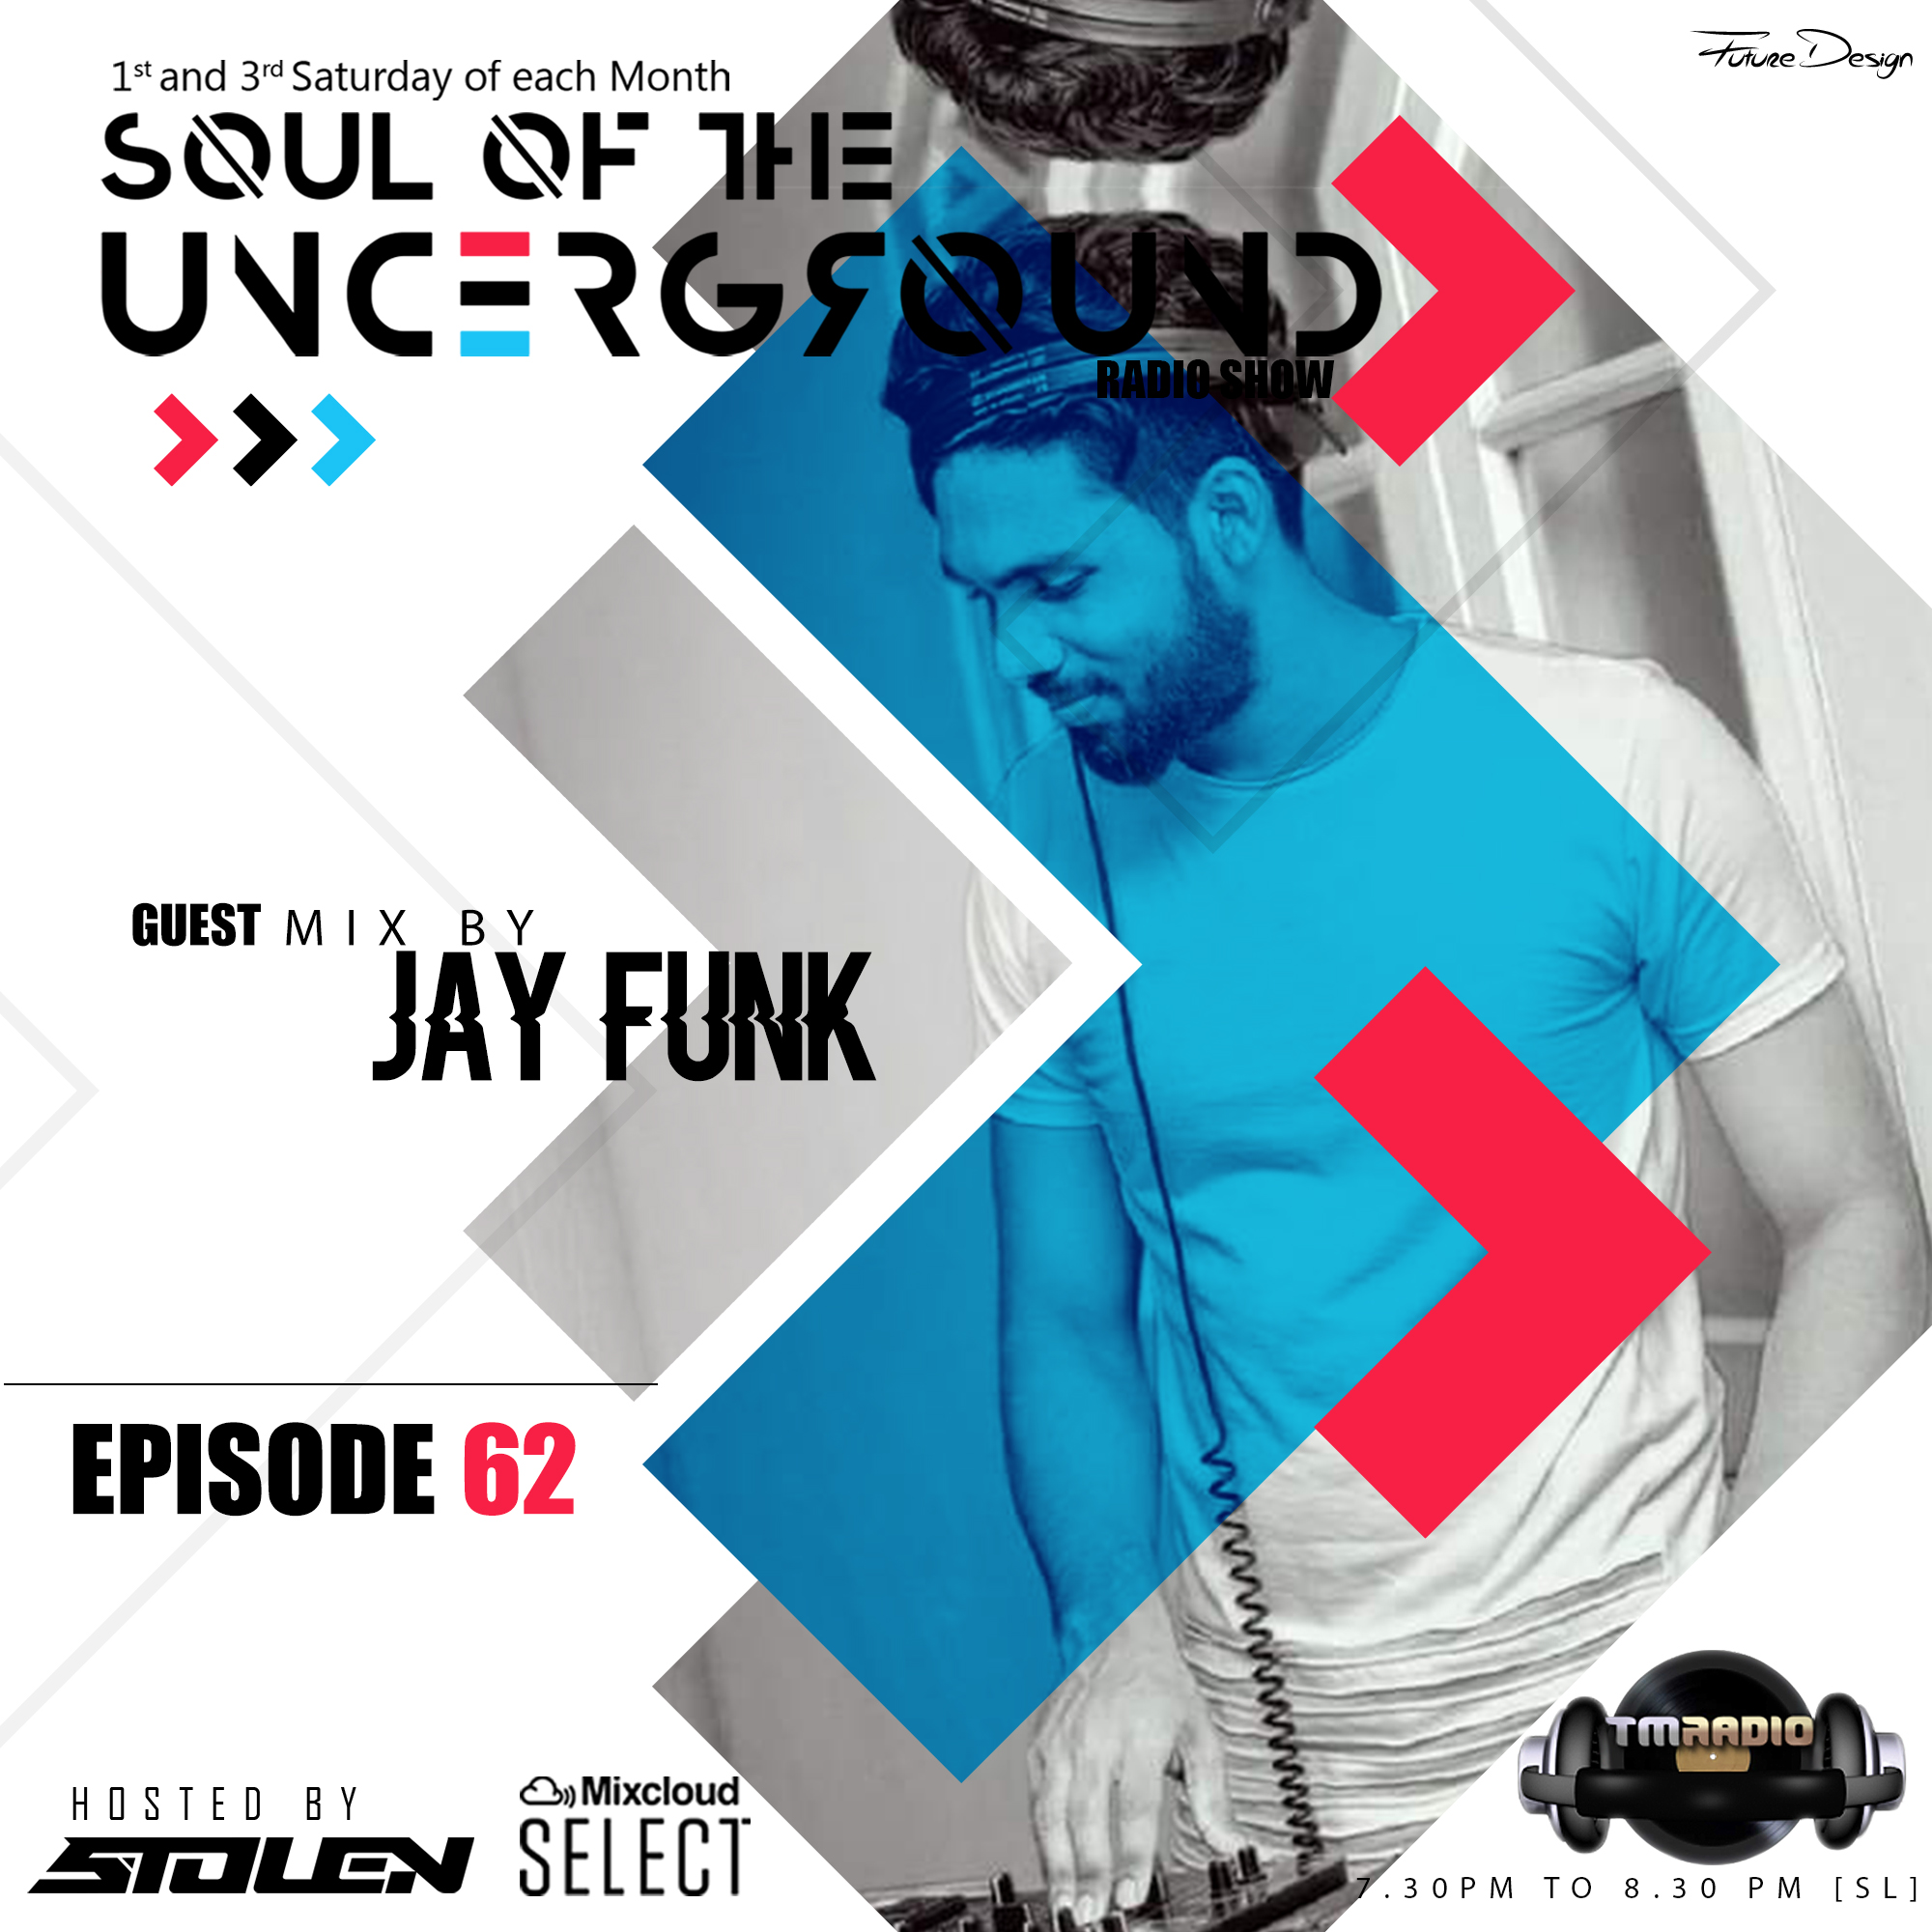  Episode 062 Guest mix by Jay Funk (Sri Lanka) (premieres on December 3rd)